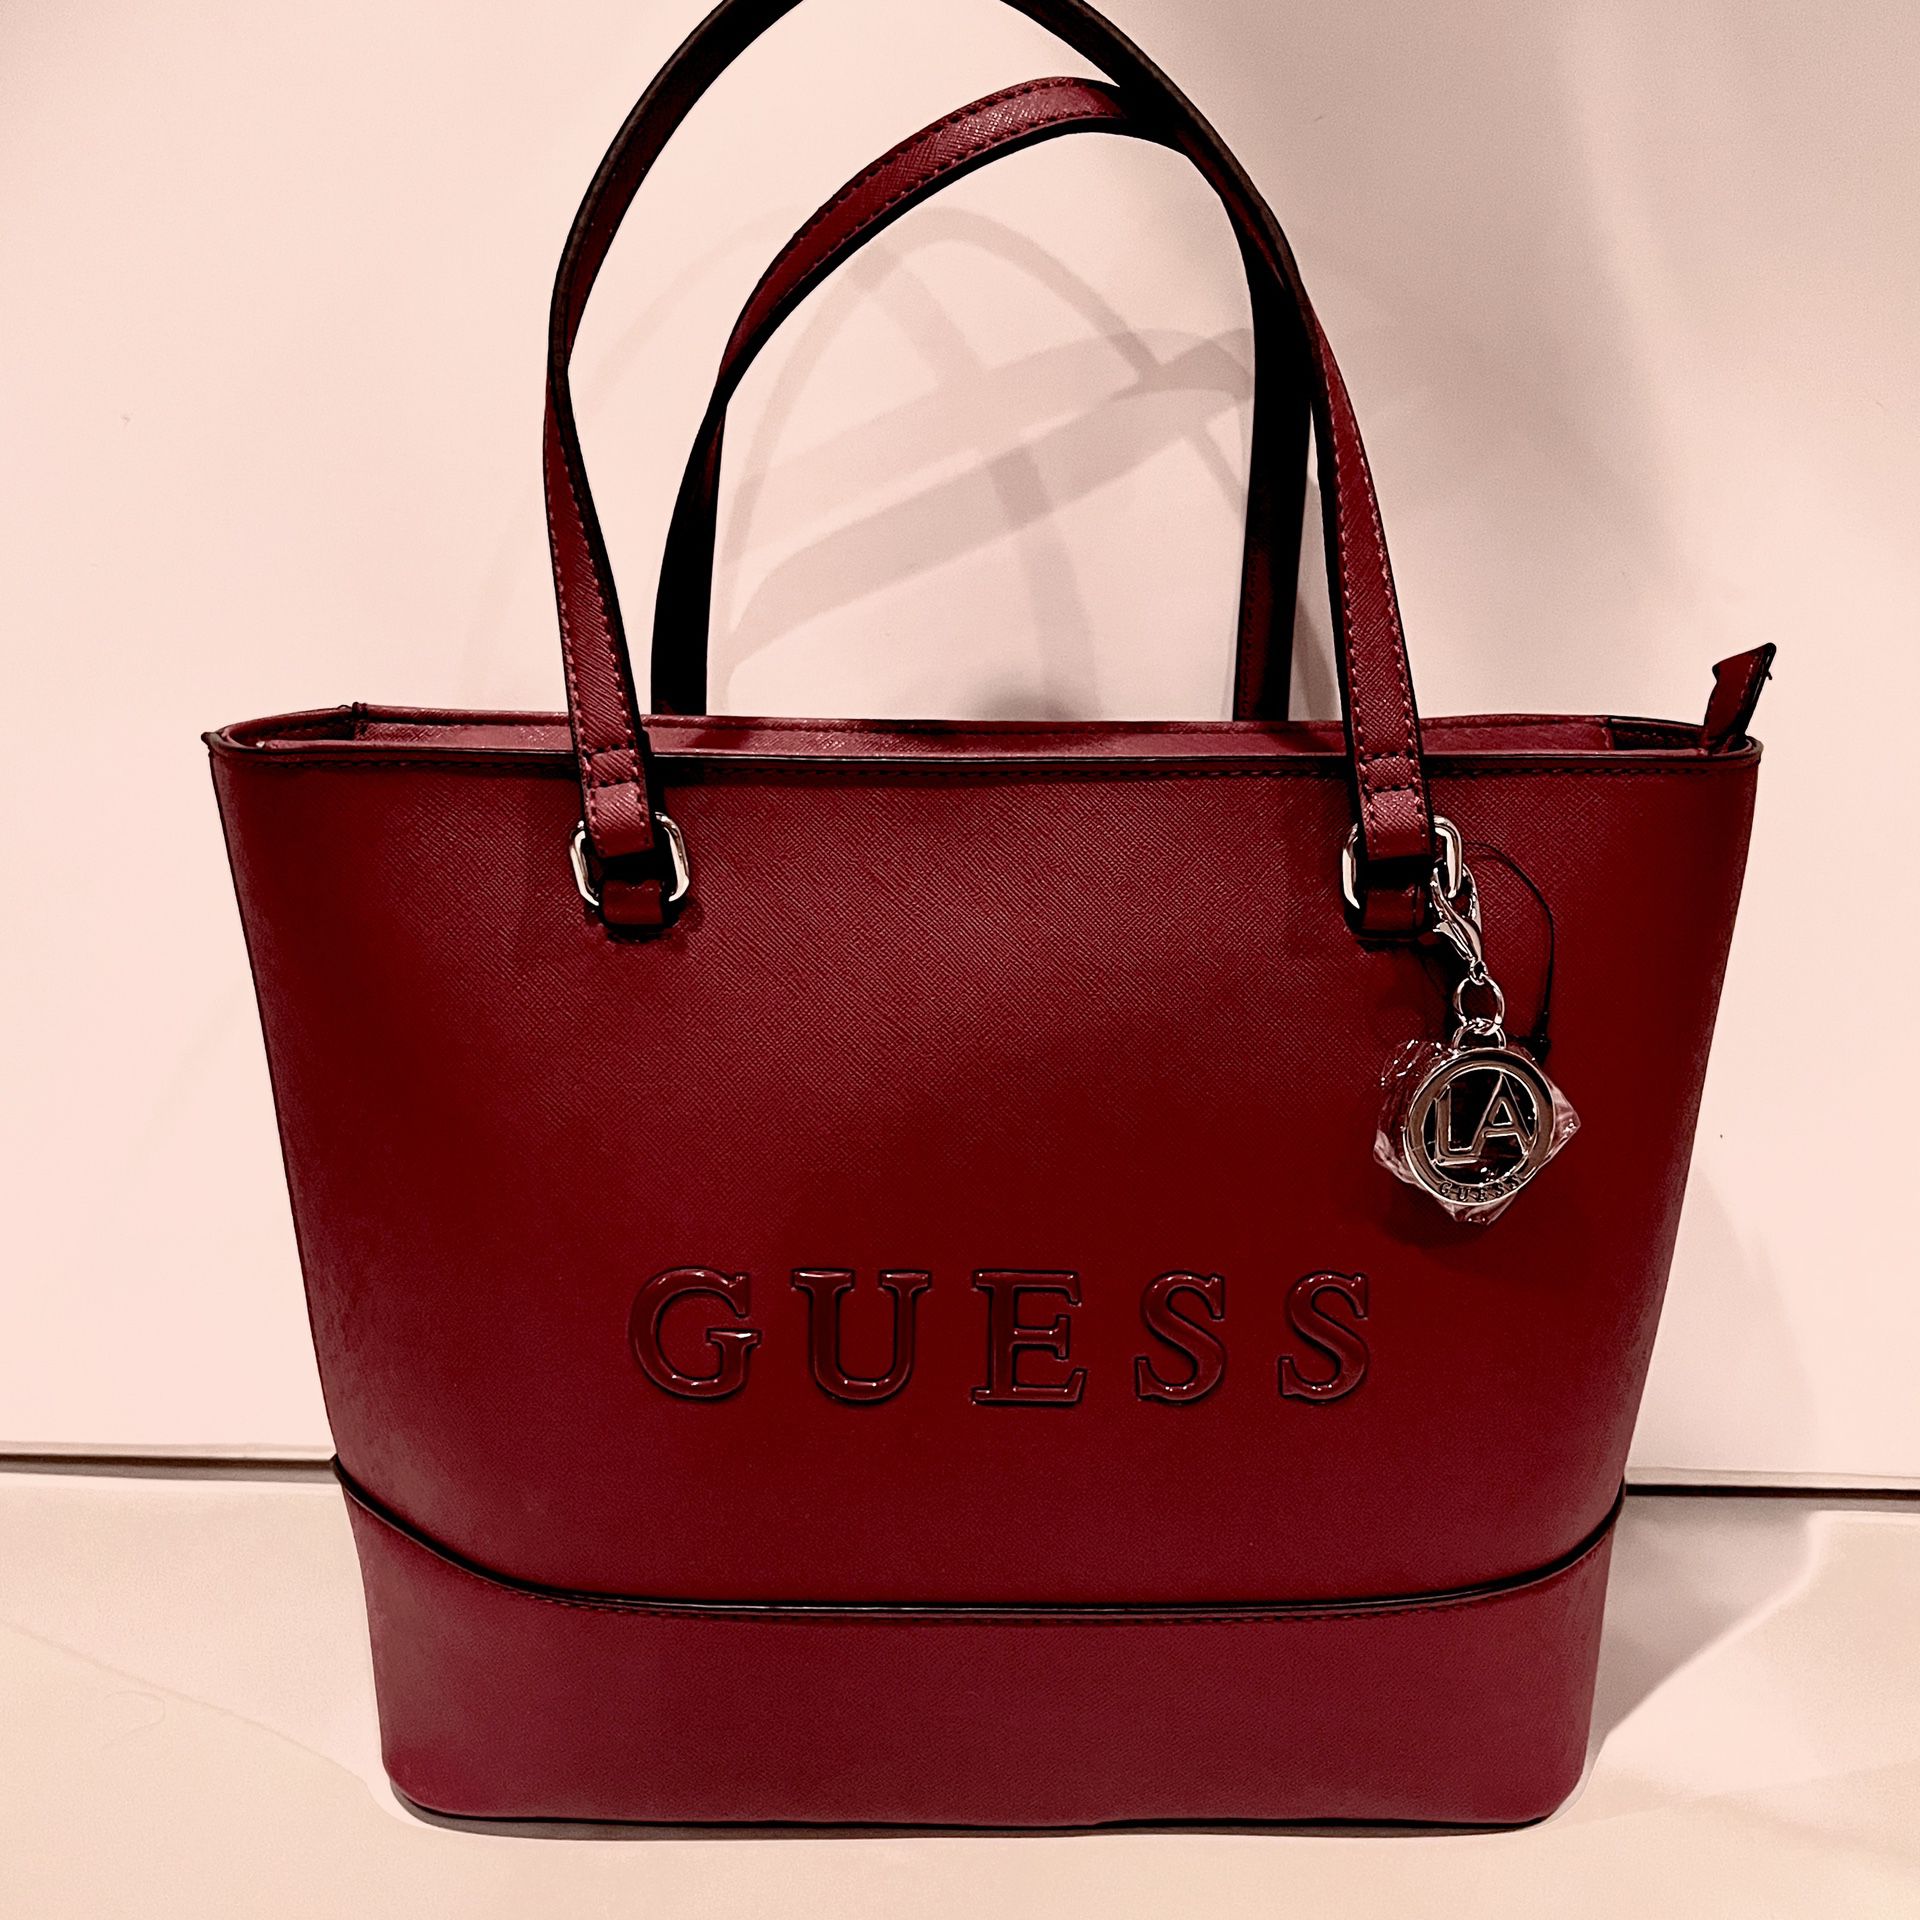 New Pink GUESS Tote Purse Hand Shoulder Bag Cranberry Rodney NWT Pink SF792622